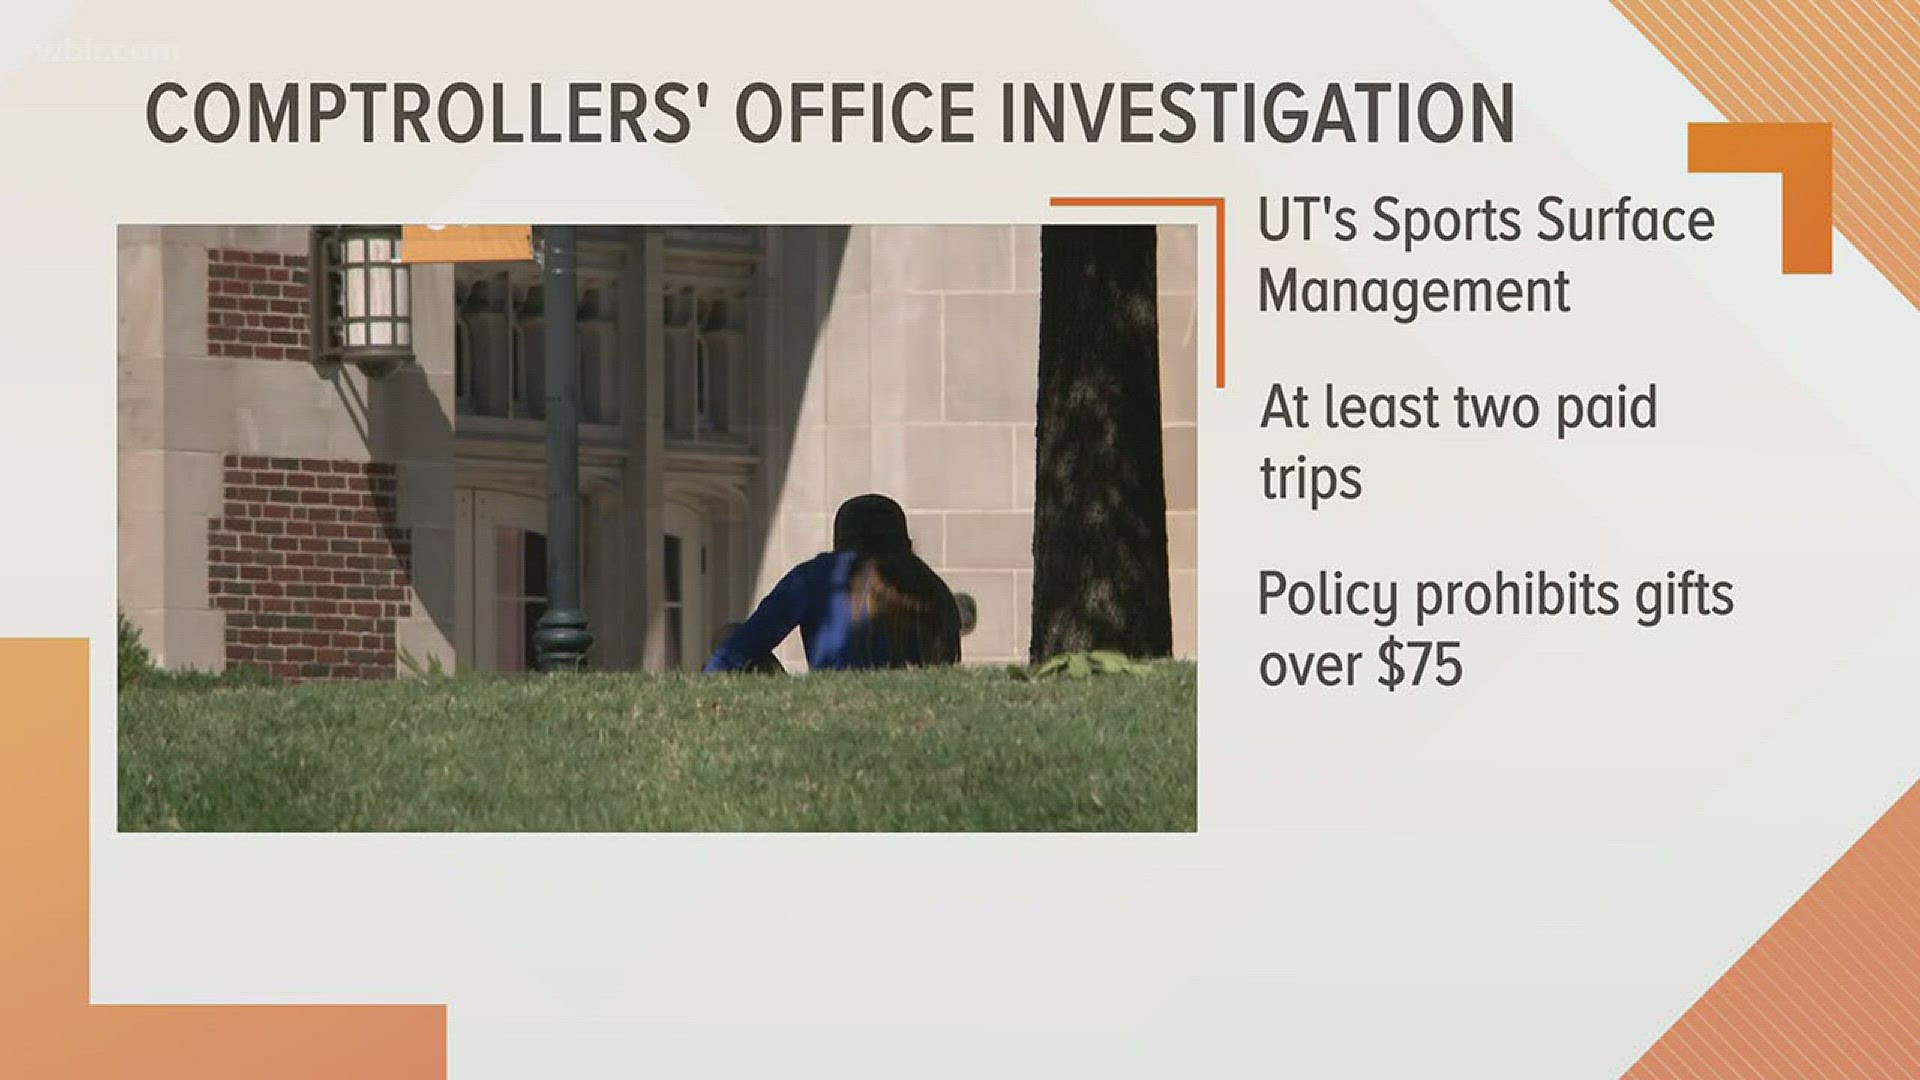 An investigation by Tennessee's Comptroller's Office found UT's Sports Surface Management has violated university policy by accepting paid trips from a department vendor or prospective vendor.